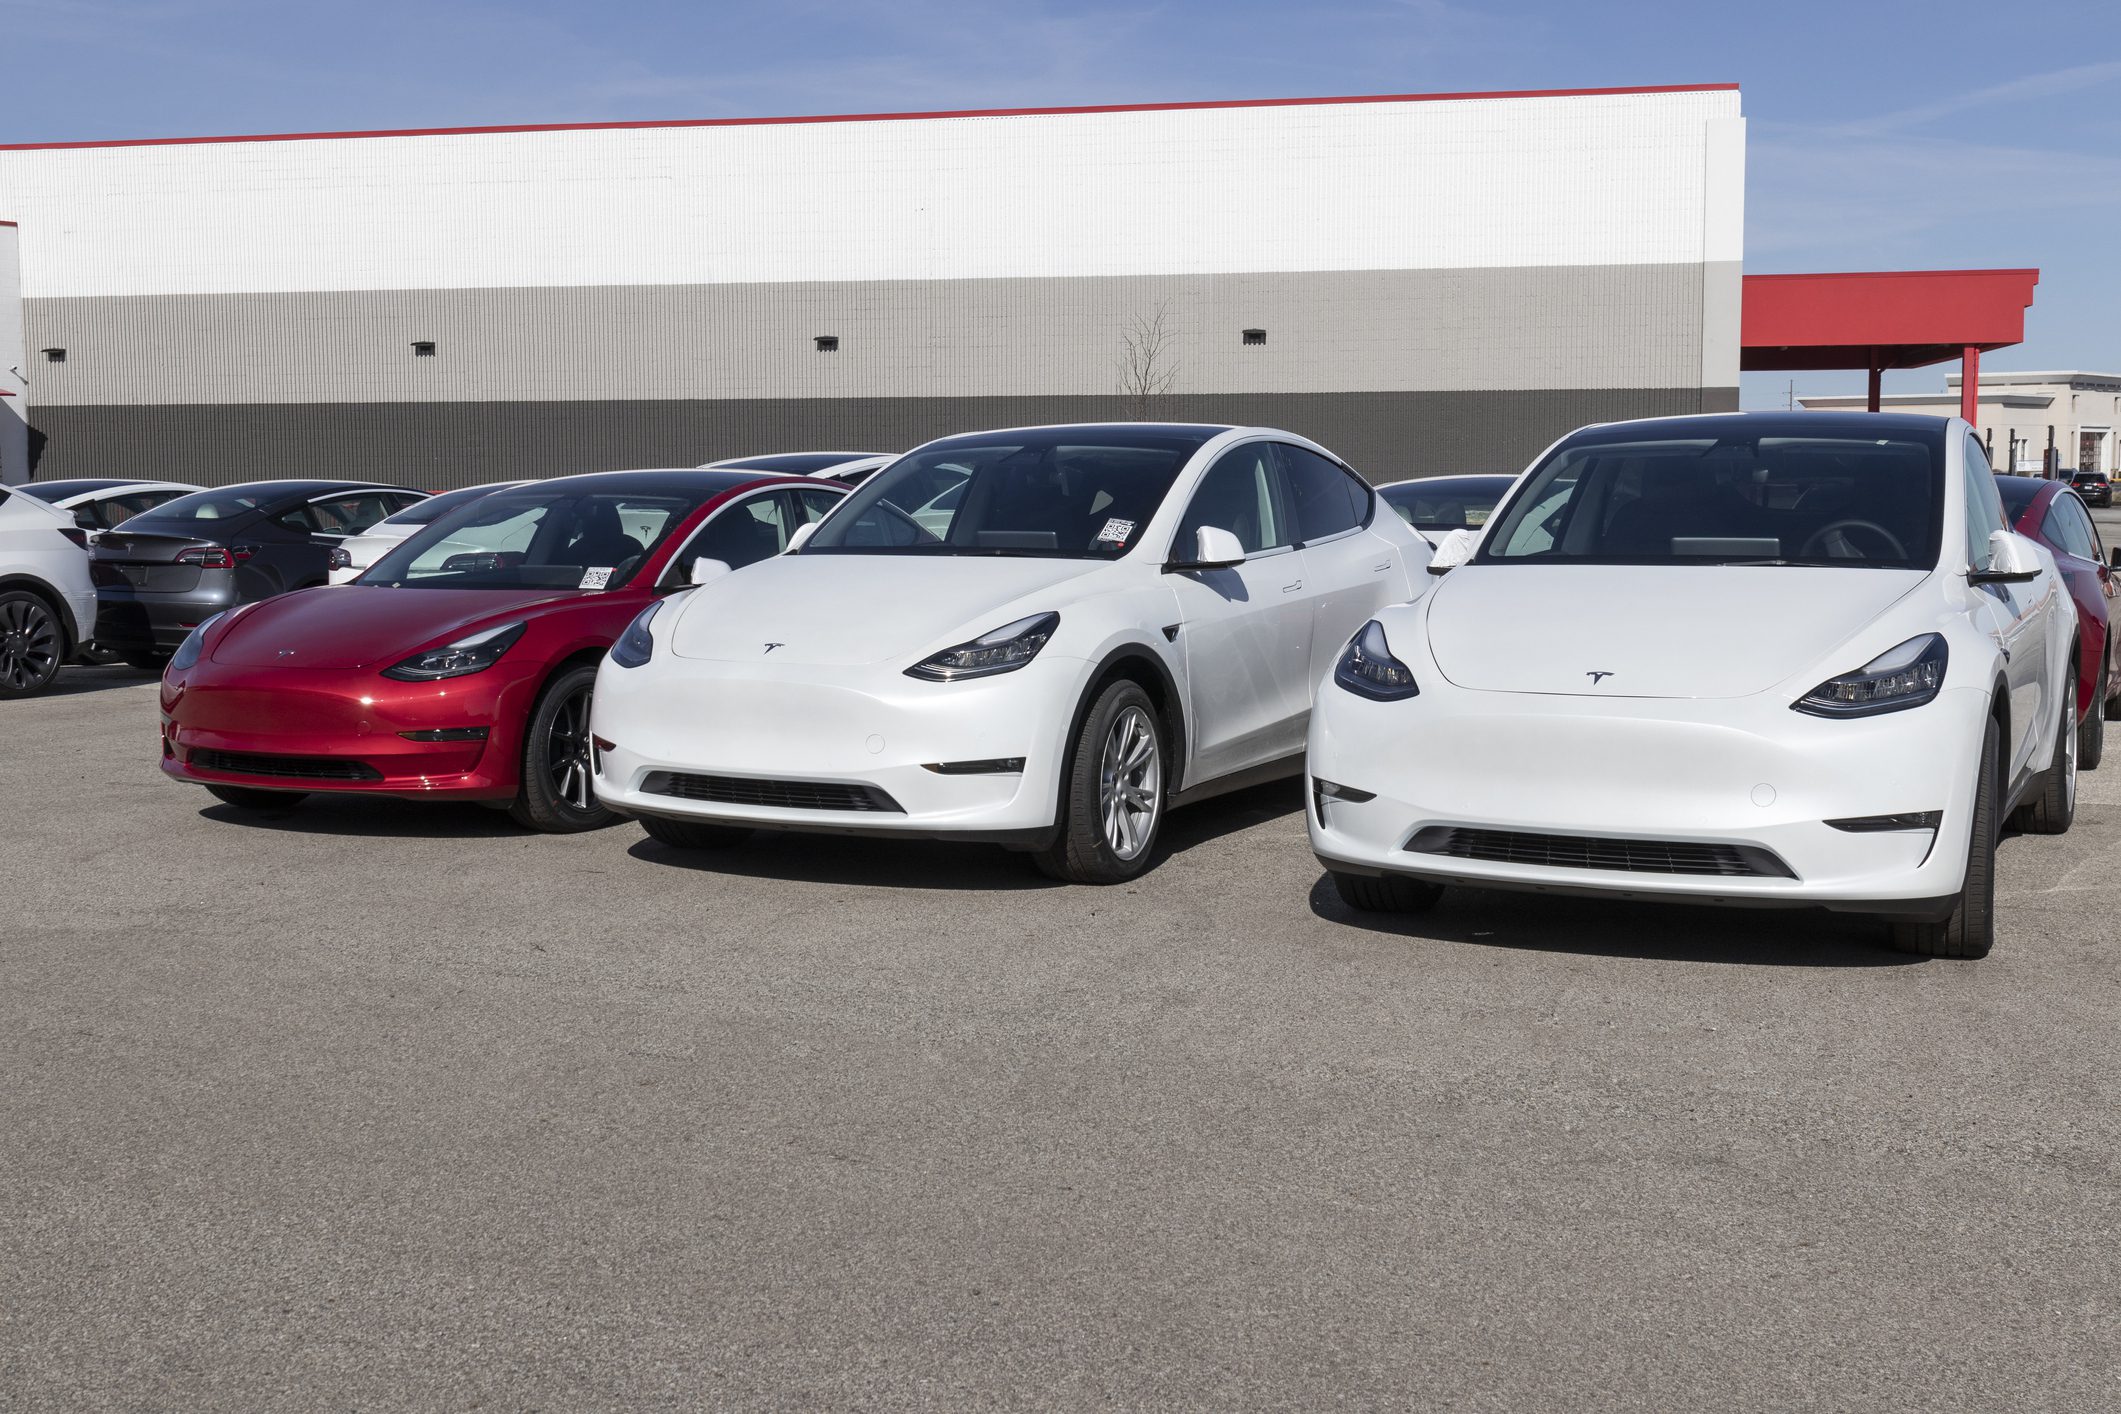 Tesla electric vehicles awaiting preparation for sale. Tesla products include electric cars, battery energy storage and solar panels.